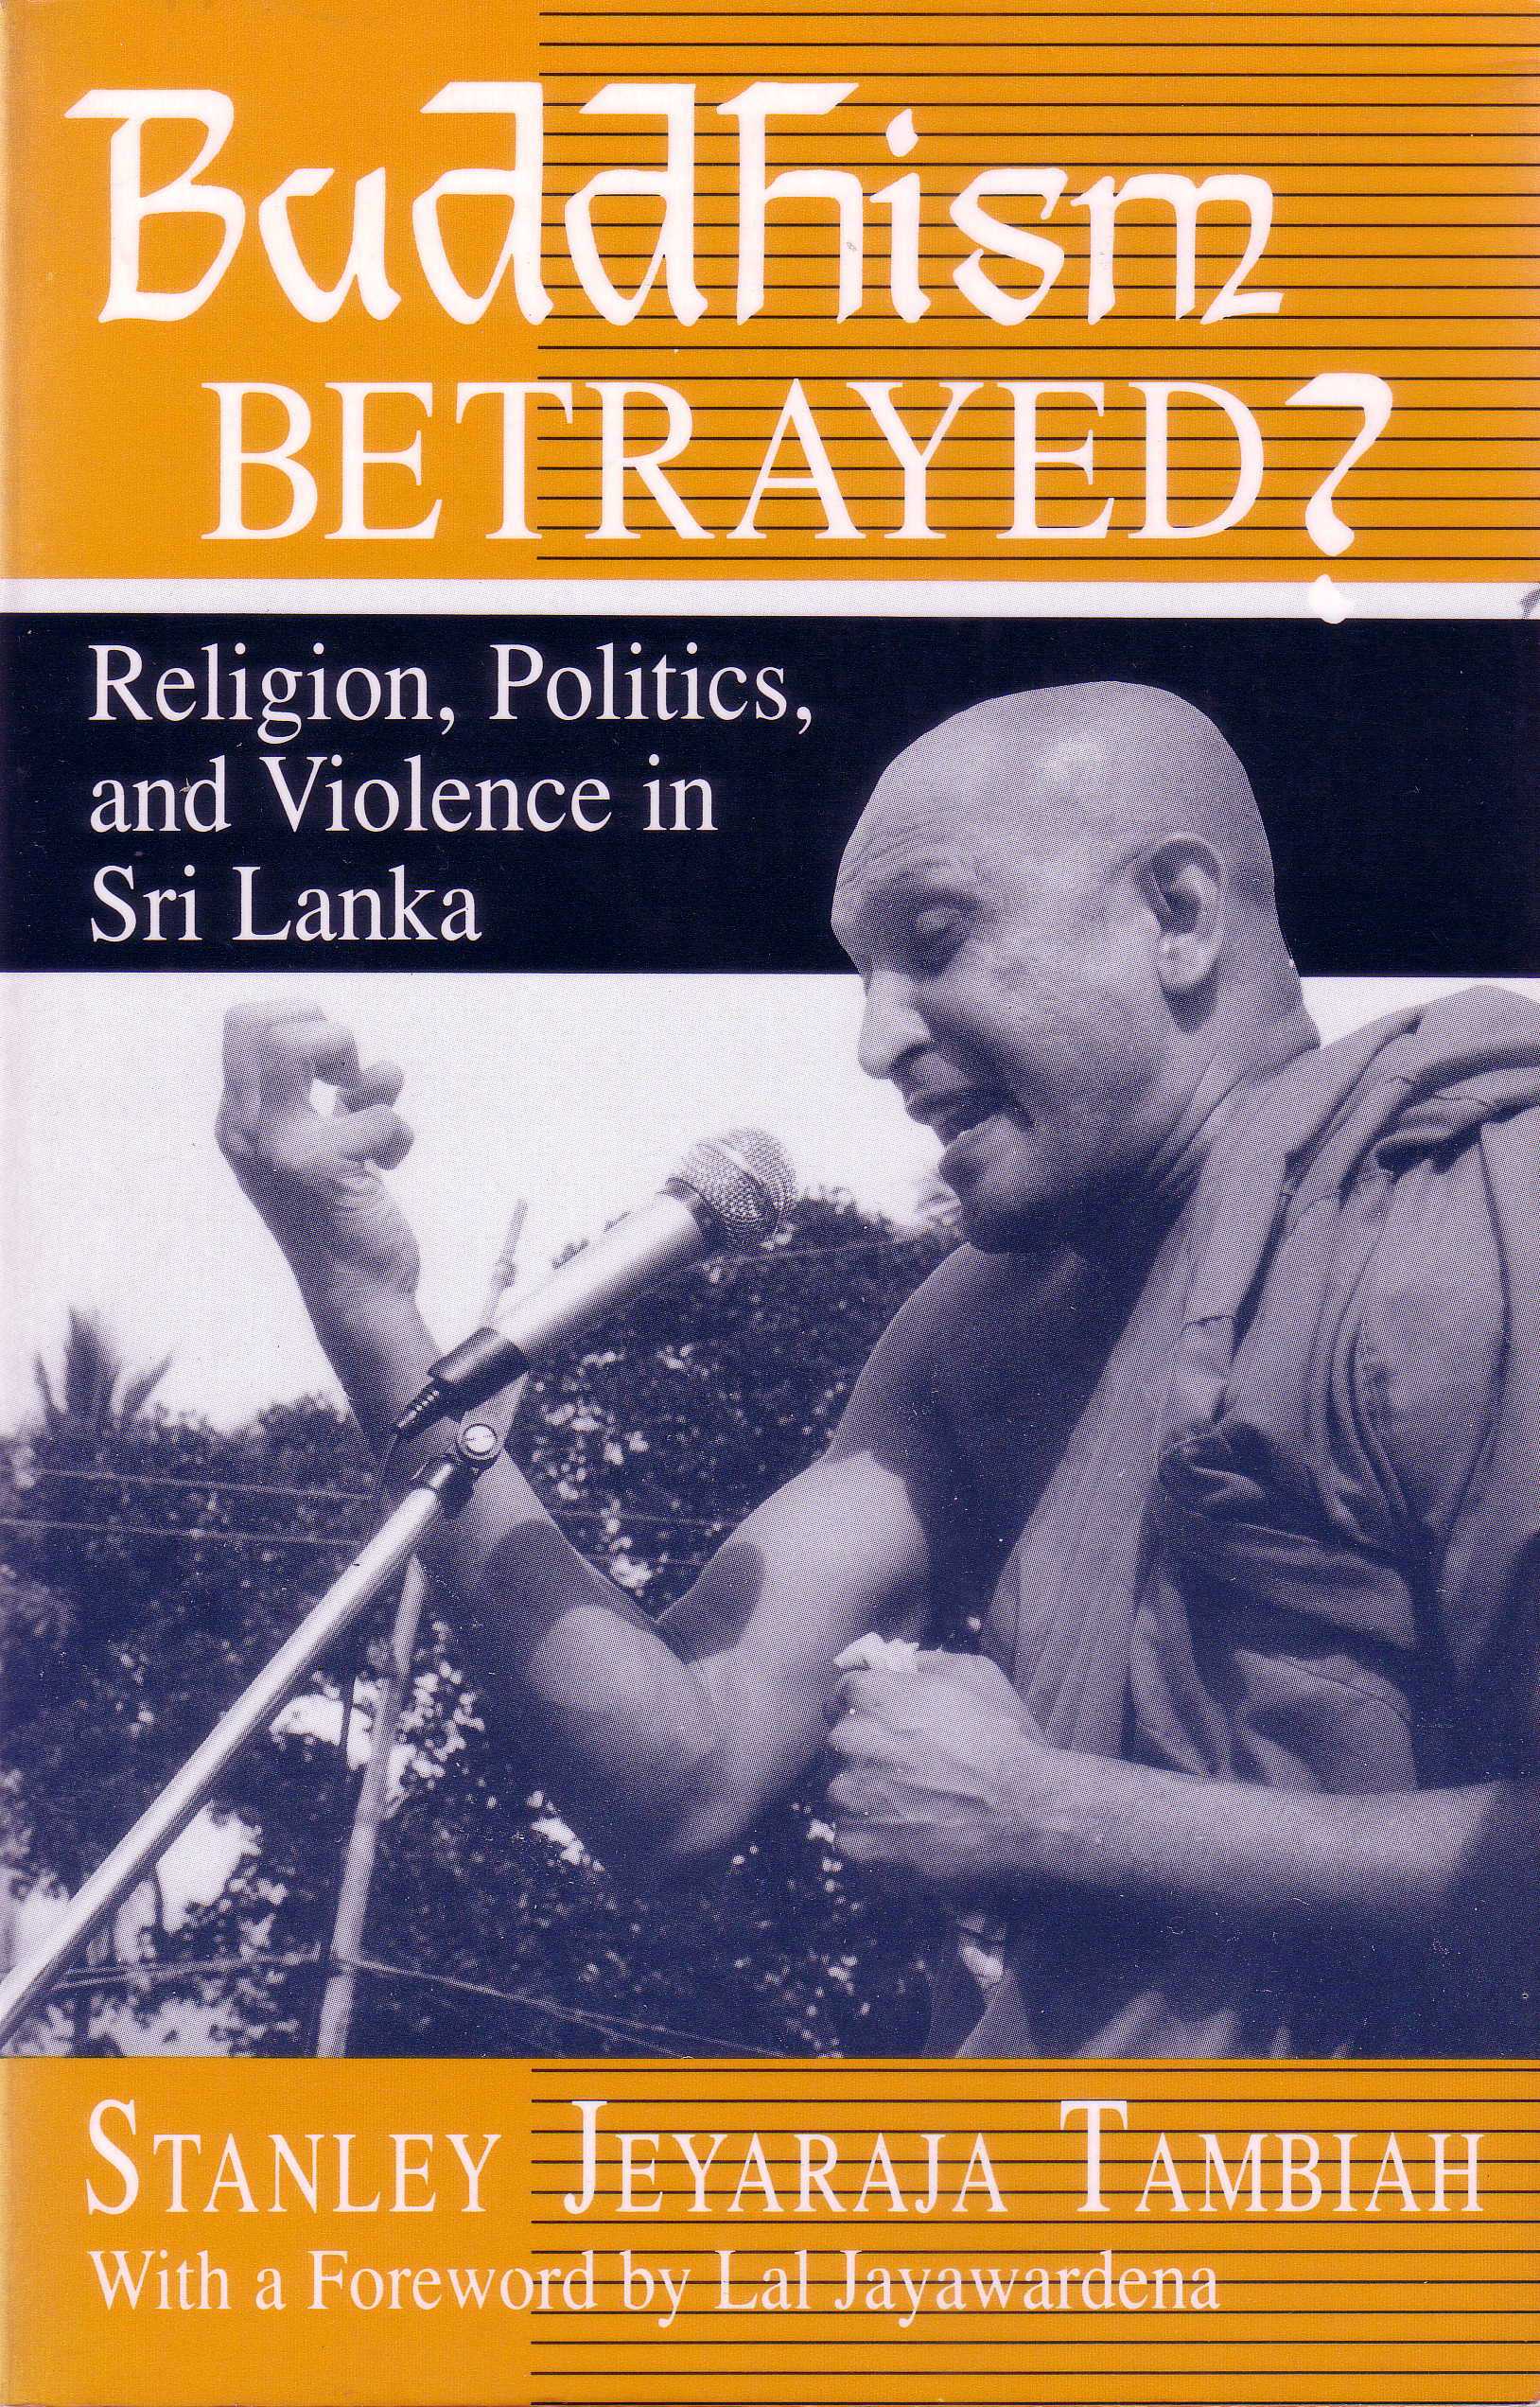 Buddhism-Betrayed-cover